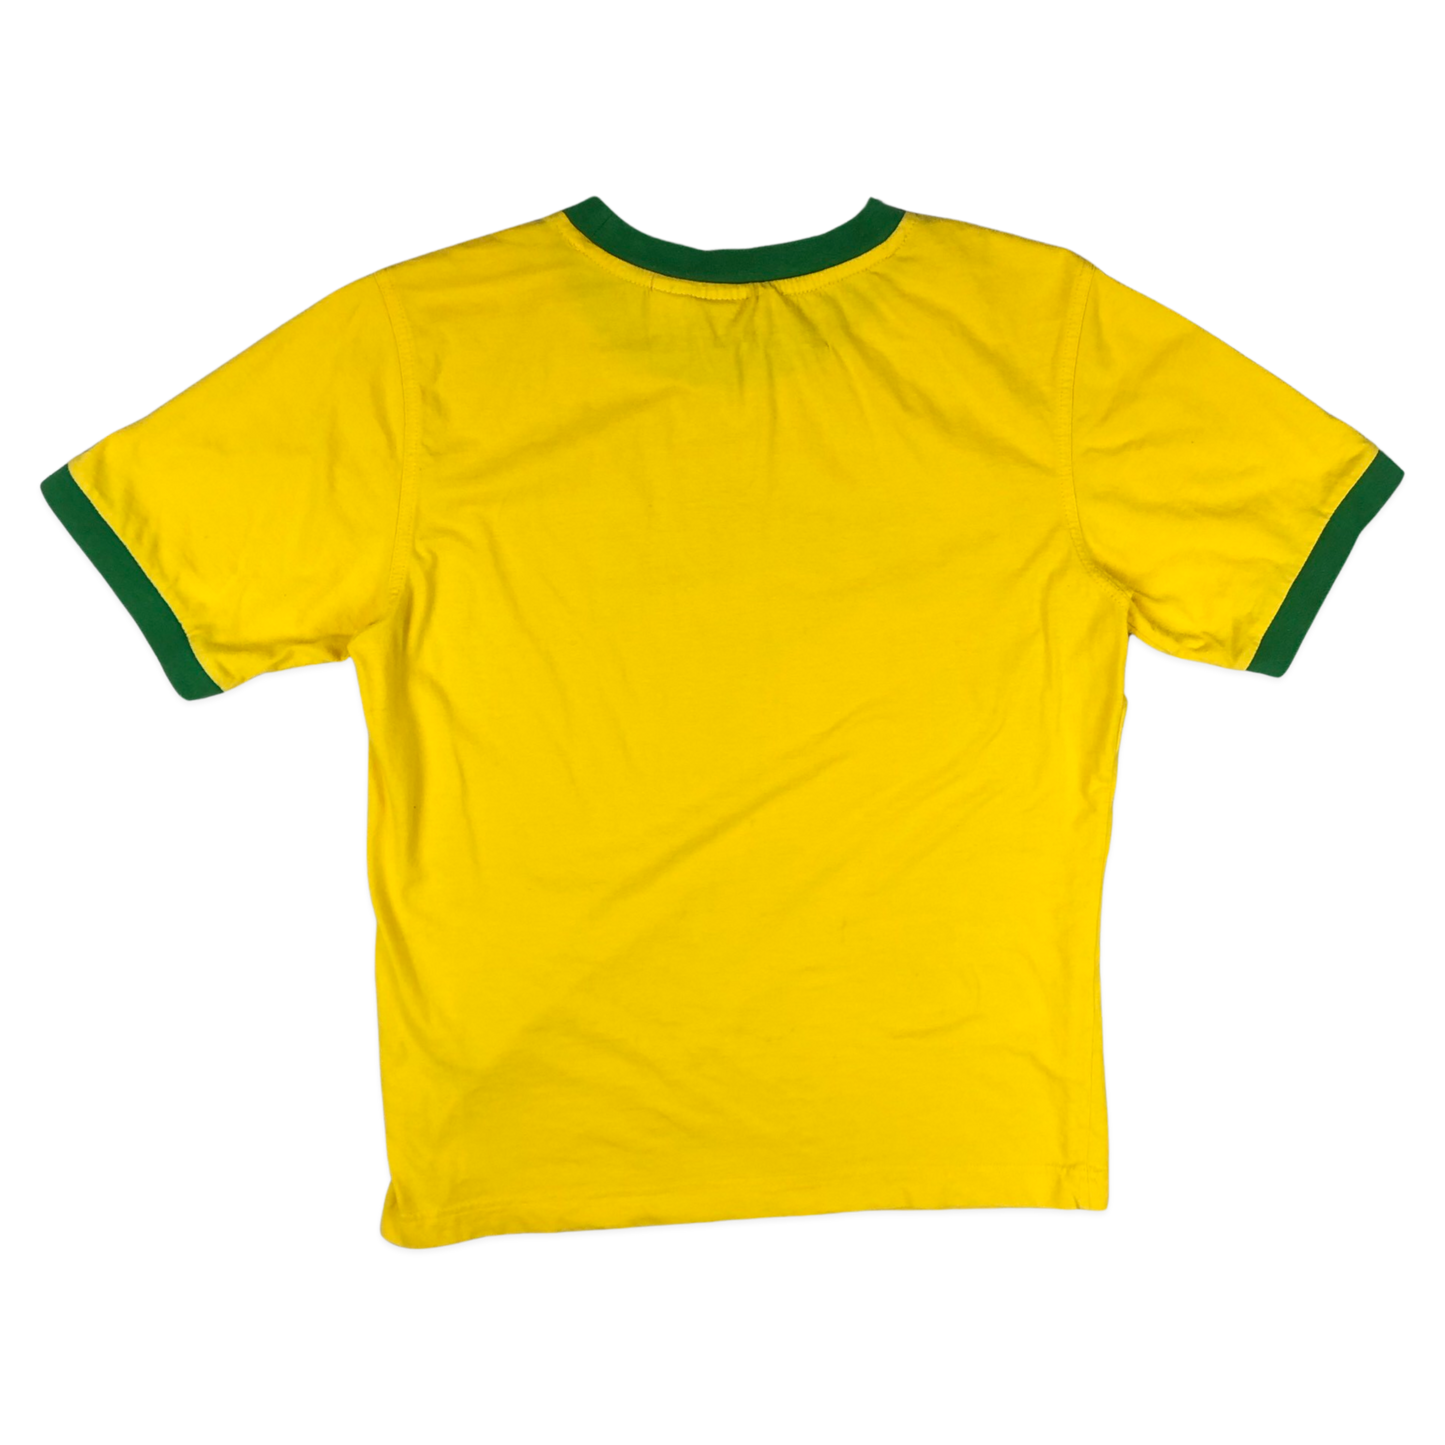 Vintage Puma Yellow and Green Ringer Tee S